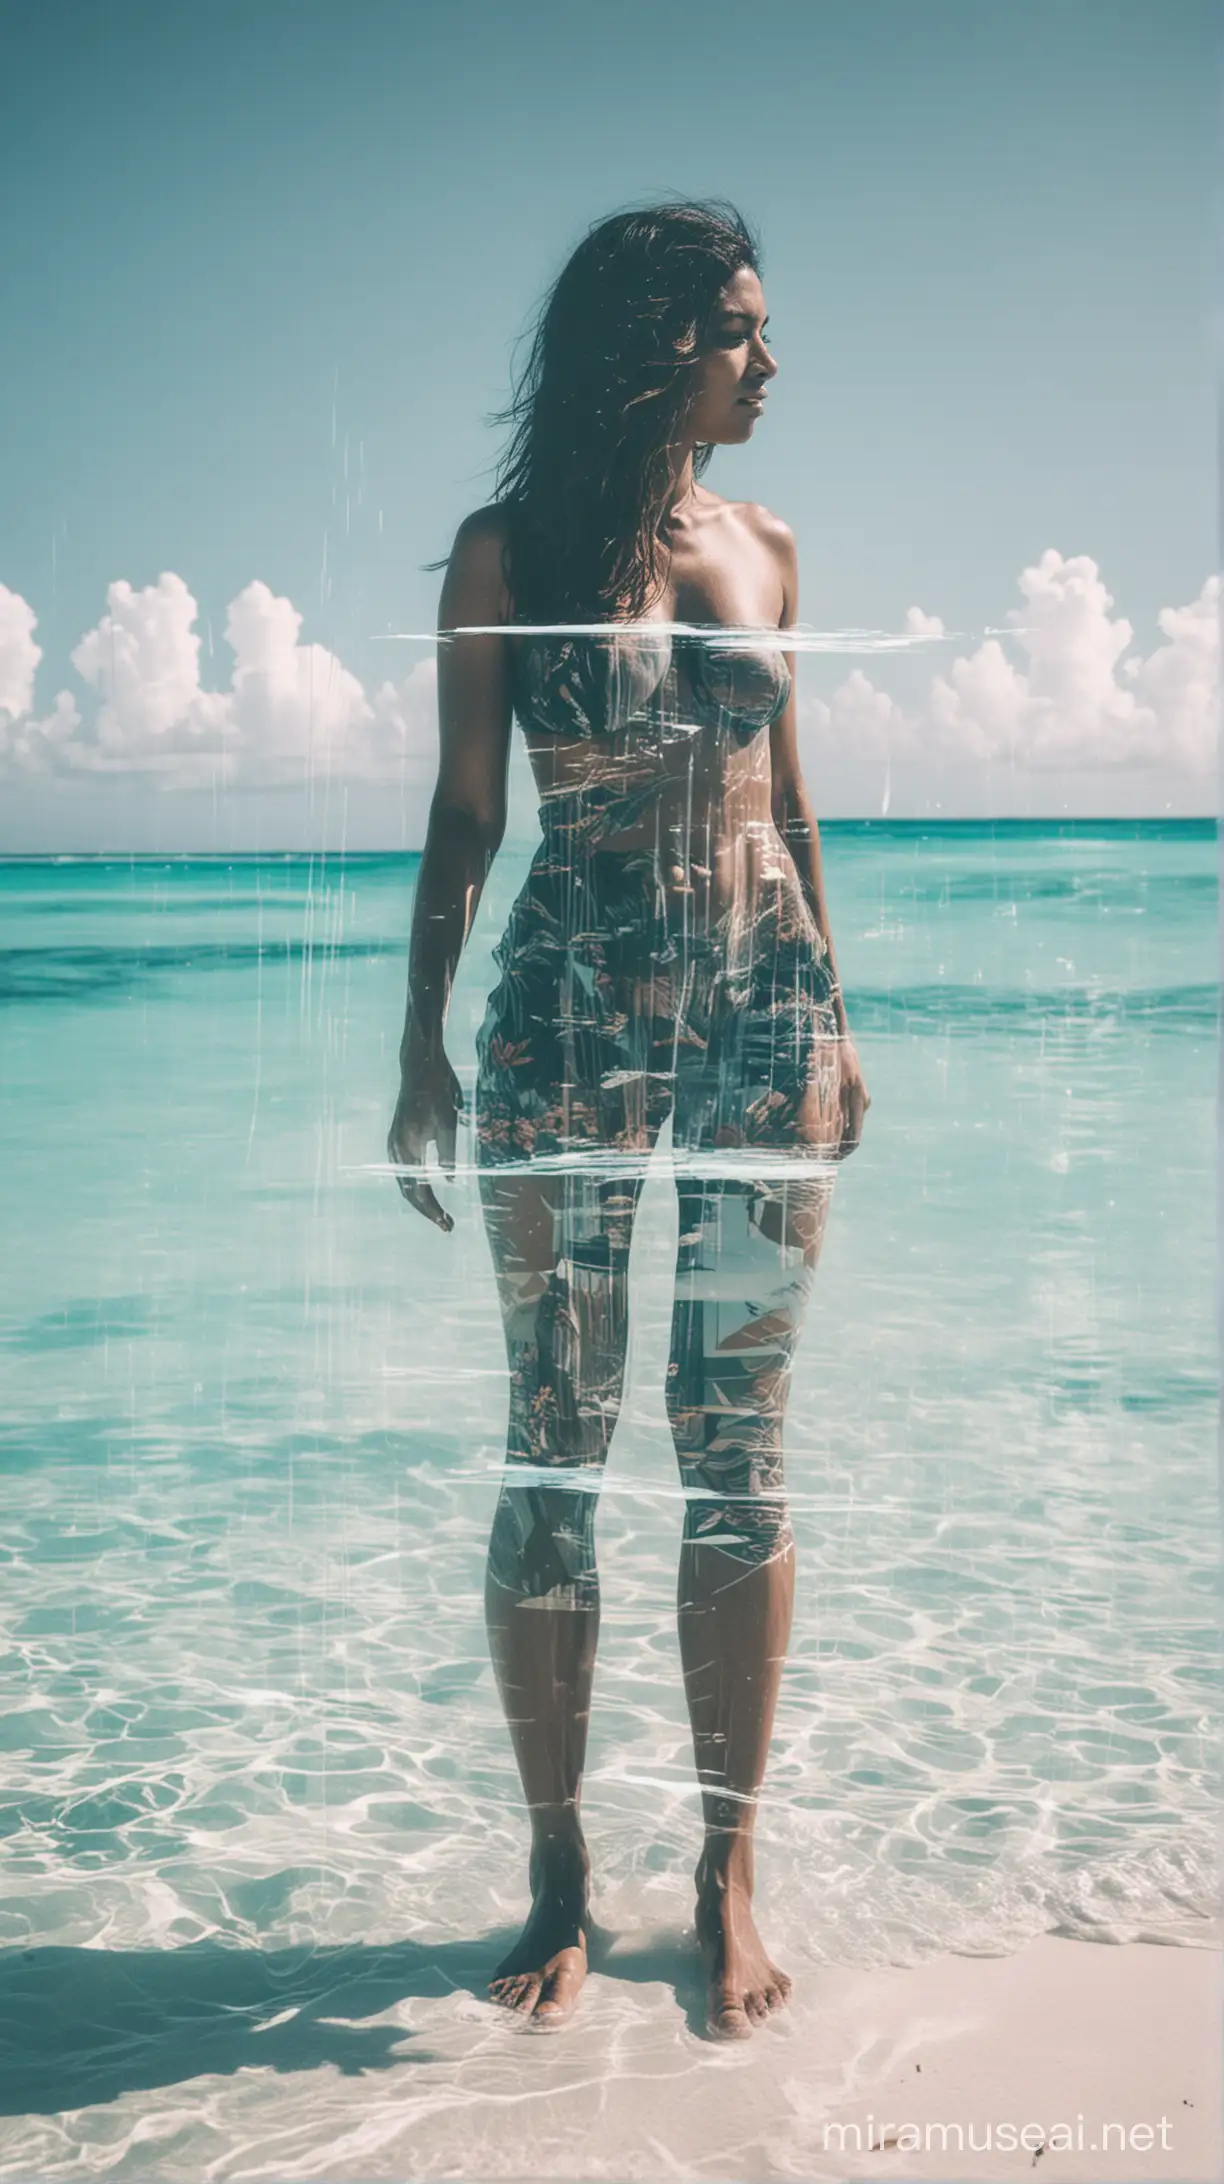 Poetic Double Exposure Photography with Glitch Effects Candid Human Poses in Maldives